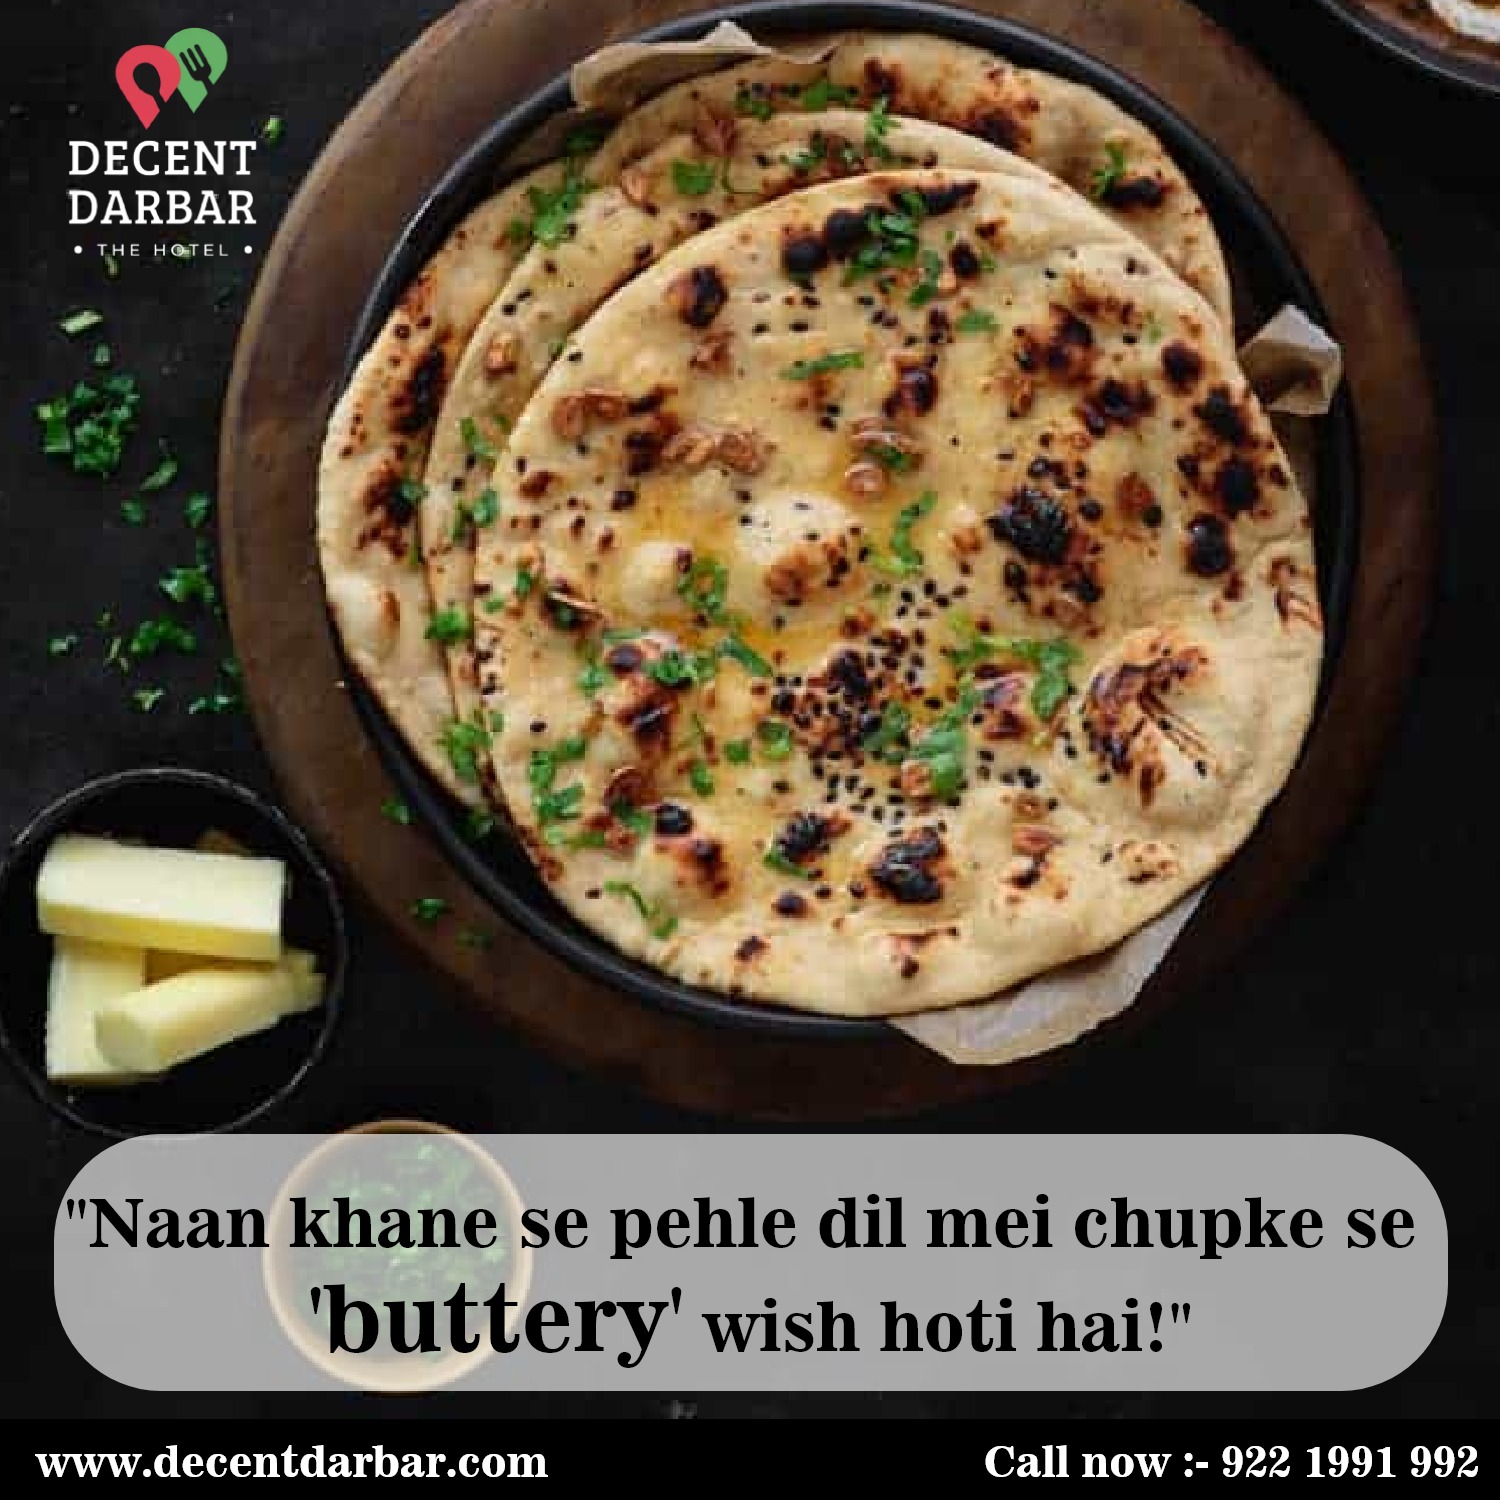 "Butter naan: the perfect partner for all your 